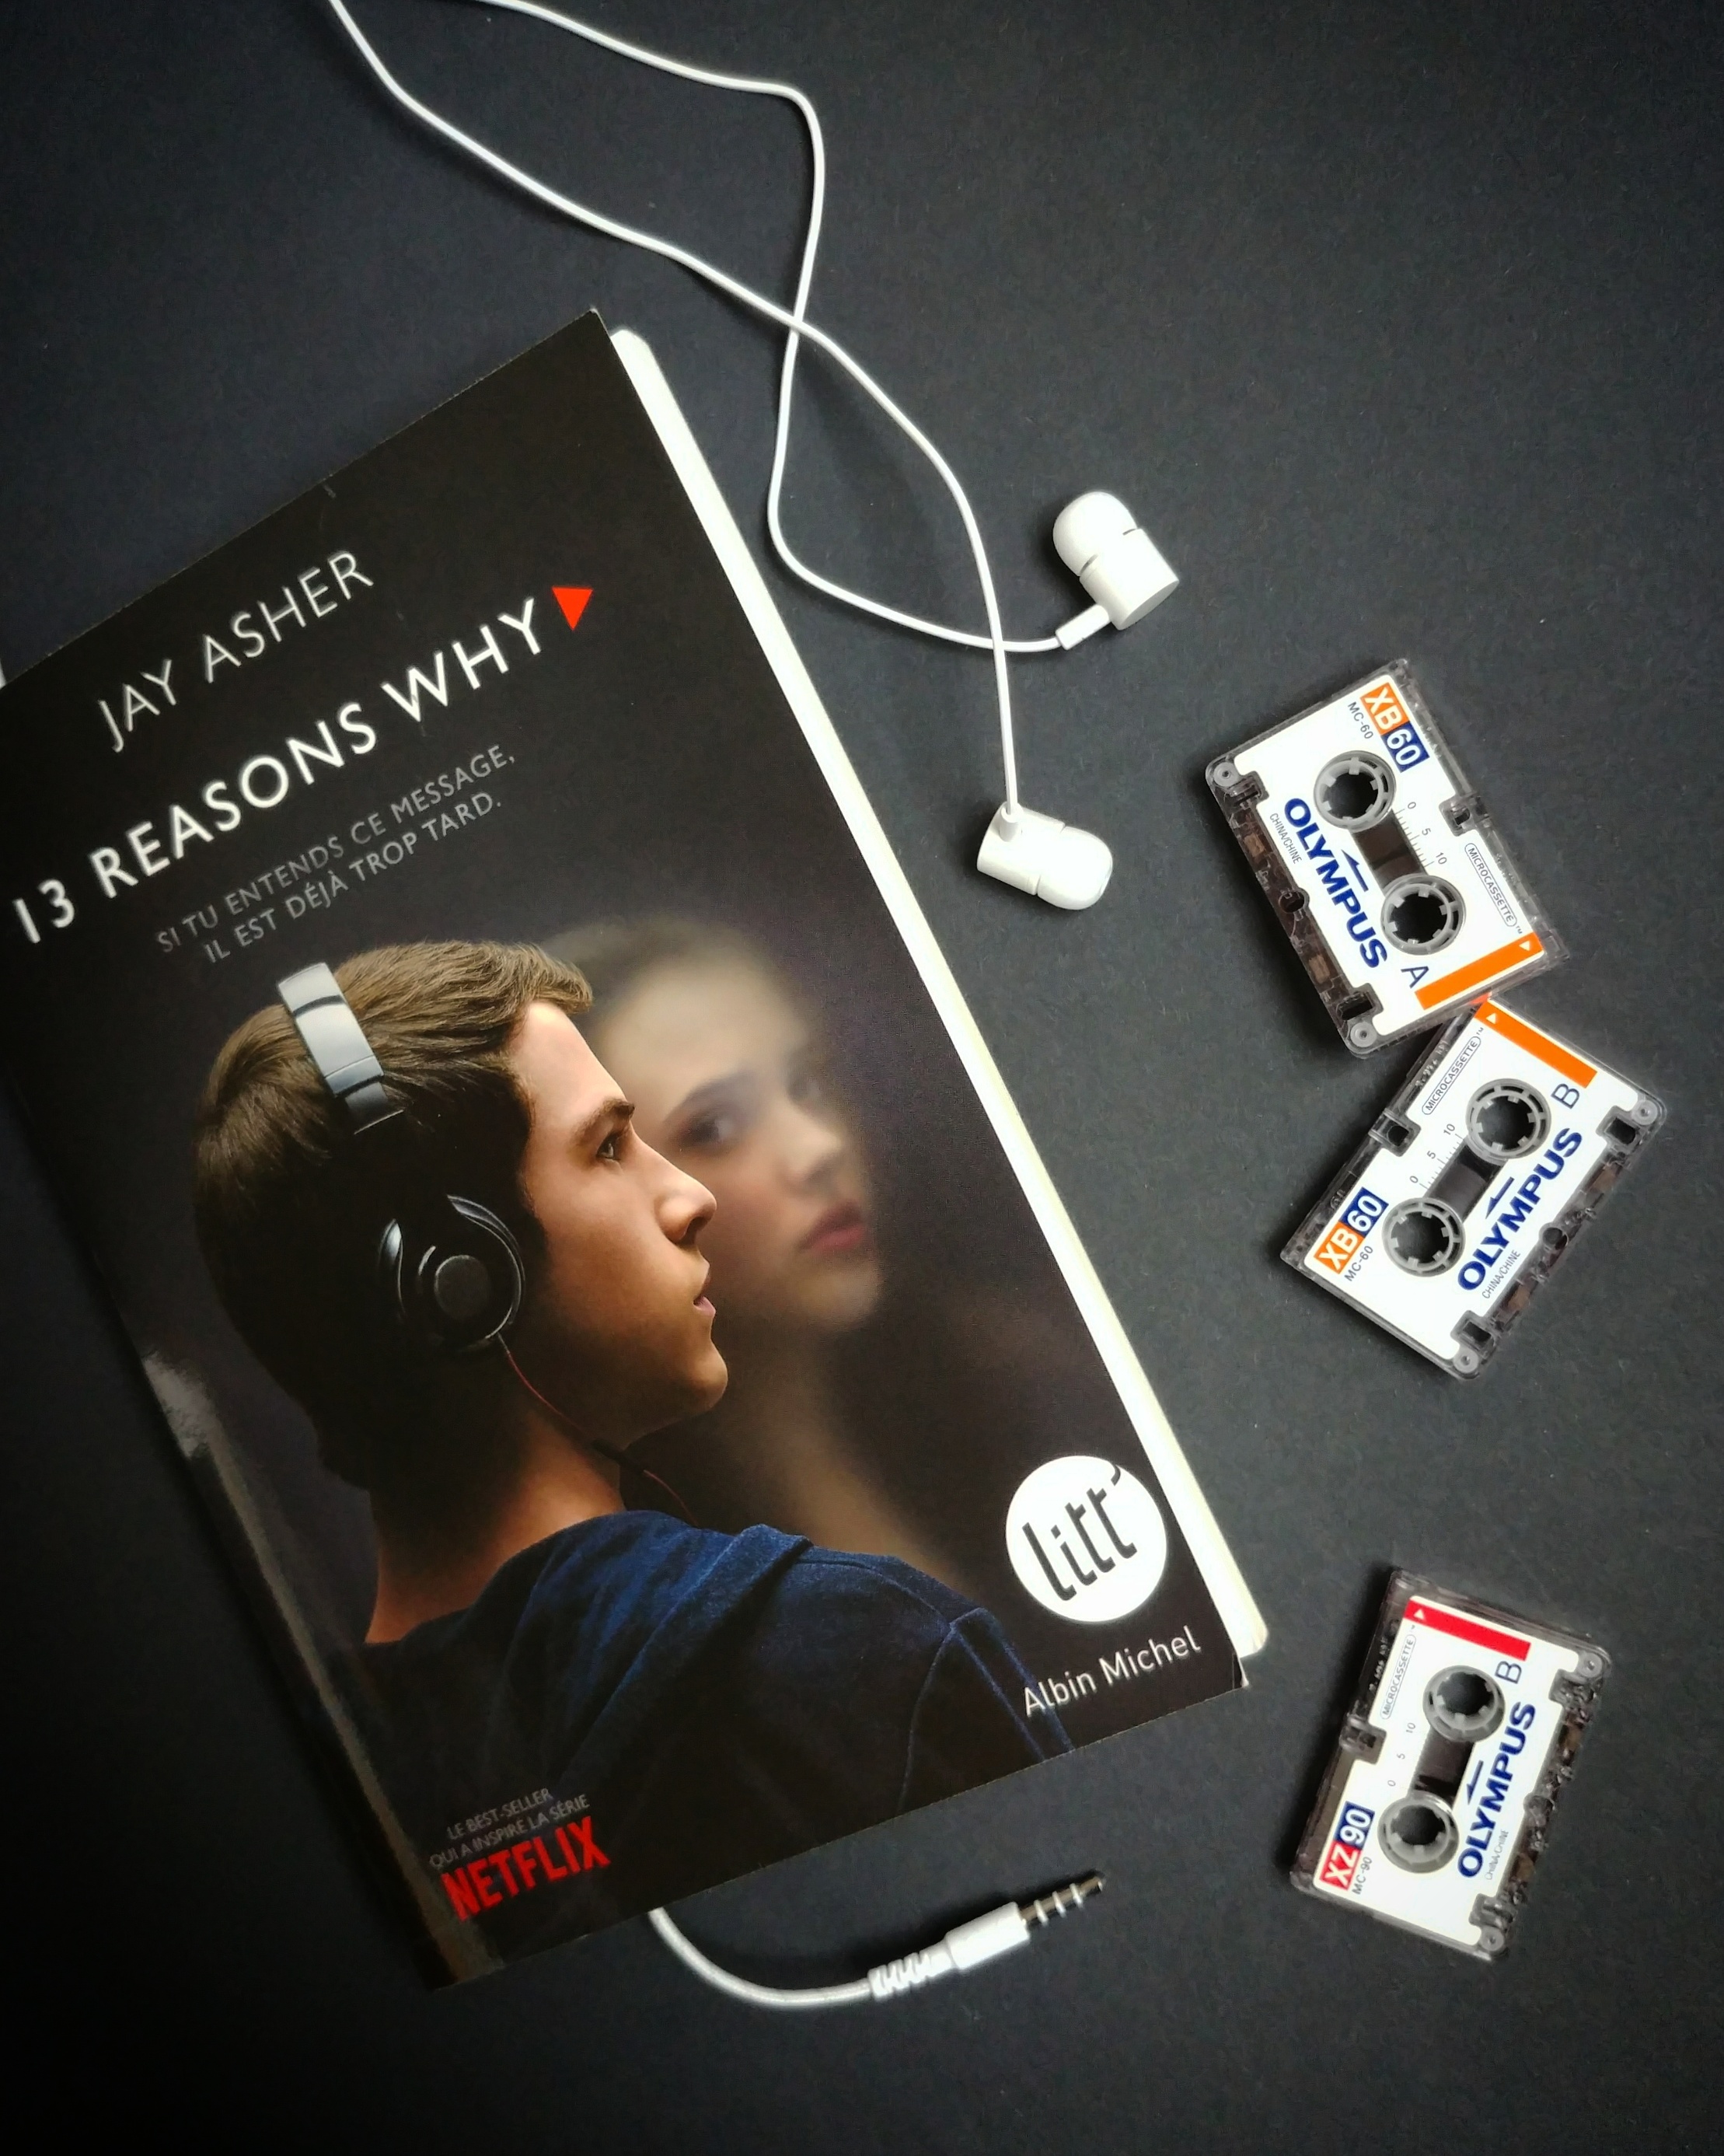 13 reasons why Jay Asher roman adolescent suicide Albin Michel